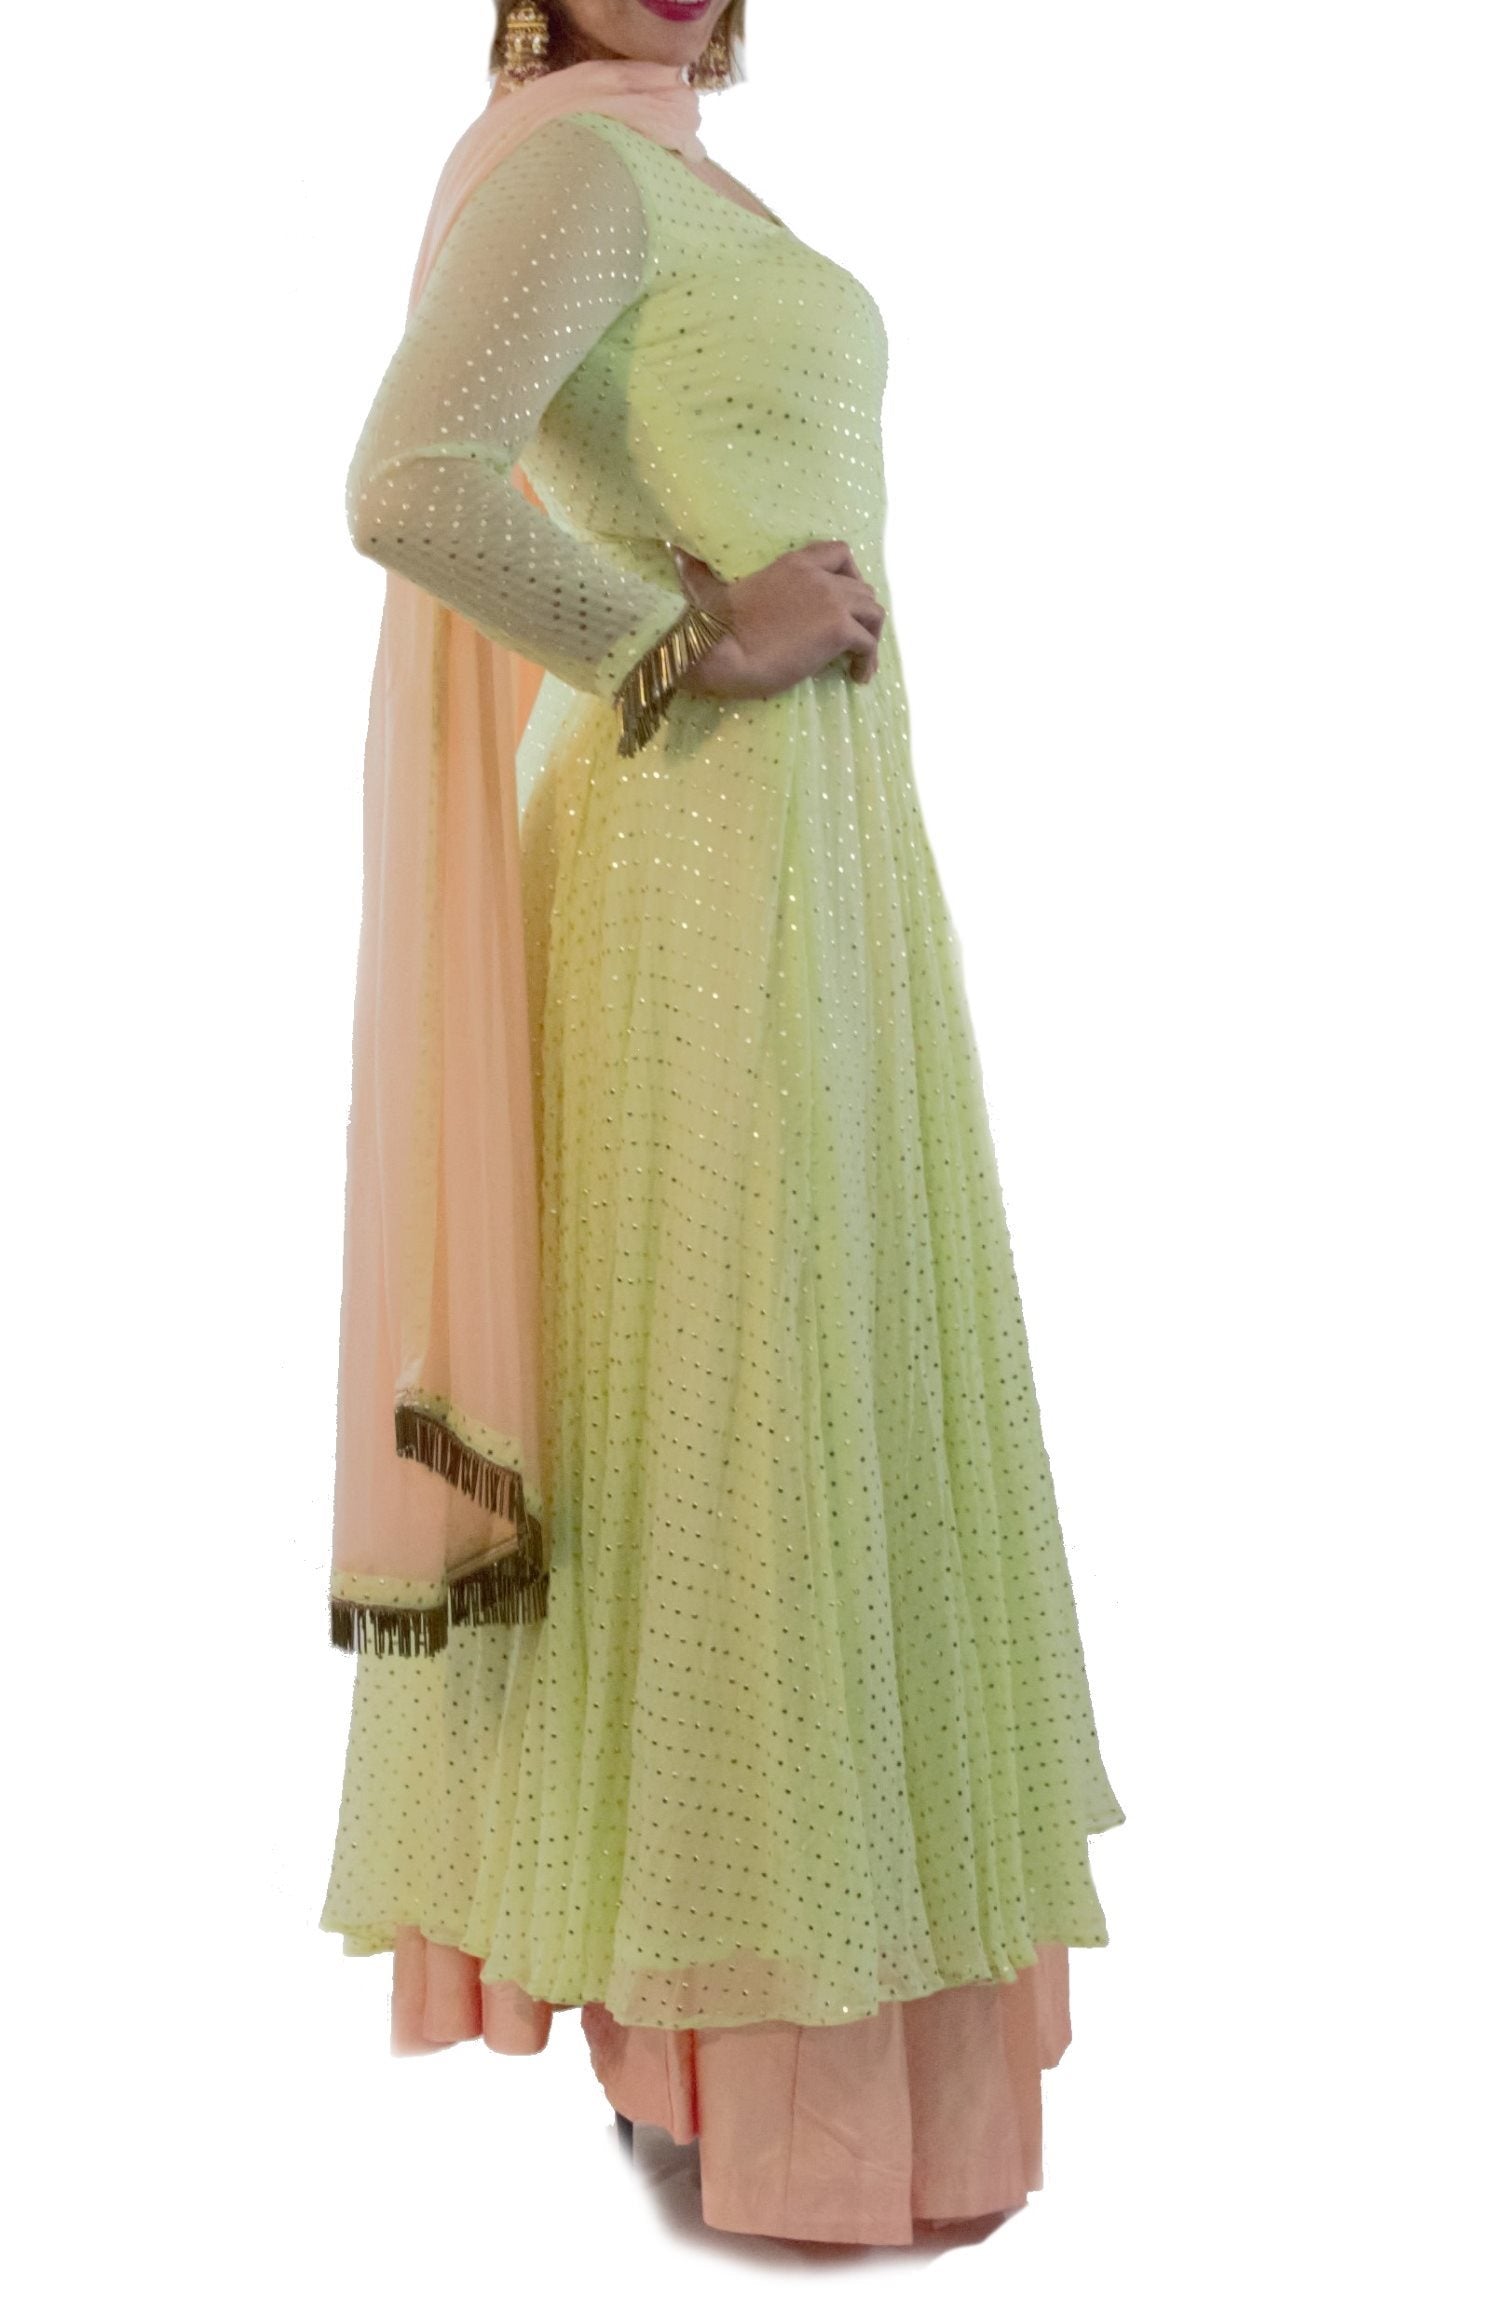 Sea Green Anarkali suit set having With Golden Dots with Skirt and Dupatta